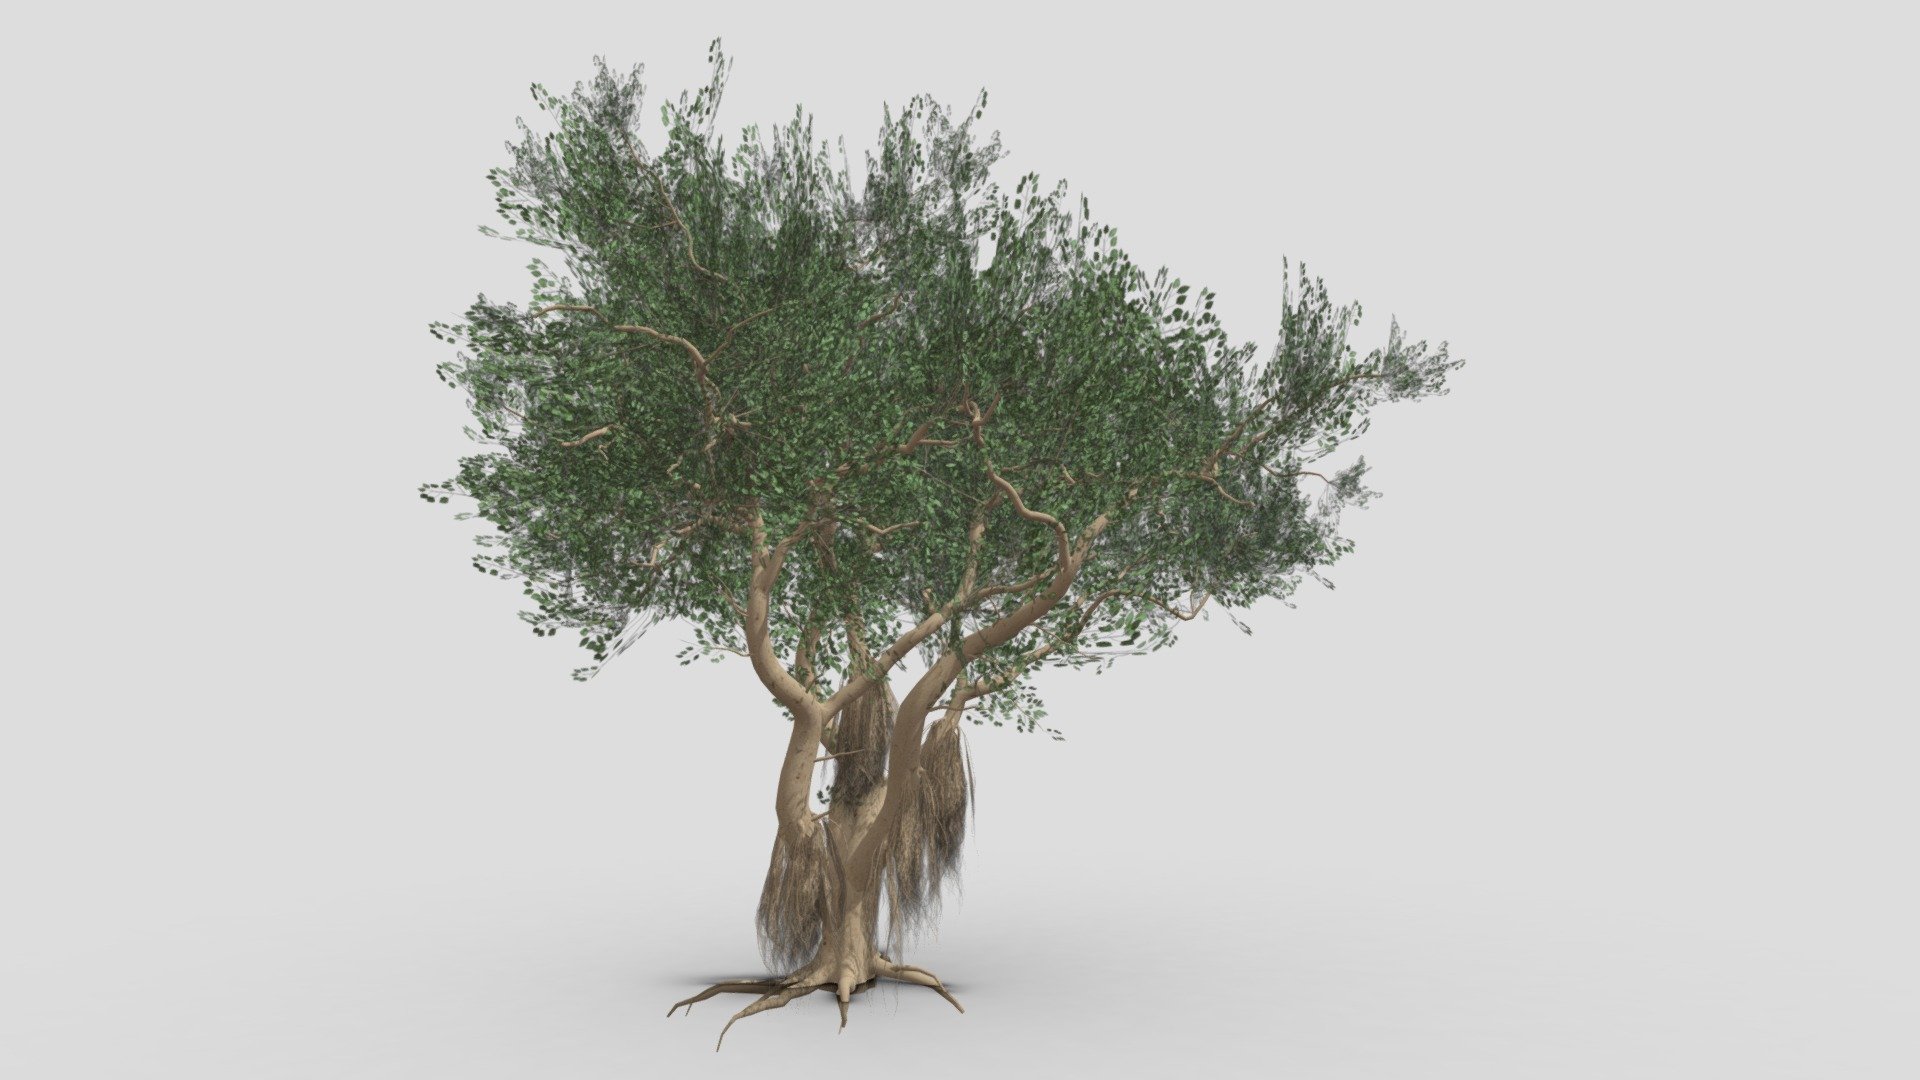 I try to work on Ficus Benjamina Tree to use this your project. this is a low poly 3D model. Tree info: Ficus Benjamina, commonly known as weeping fig, benjamin fig, or ficus tree, and often sold in stores as just ficus, is a species of flowering plant in the family Moraceae, native to Asia and Australia. It is the official tree of Bangkok 3d model